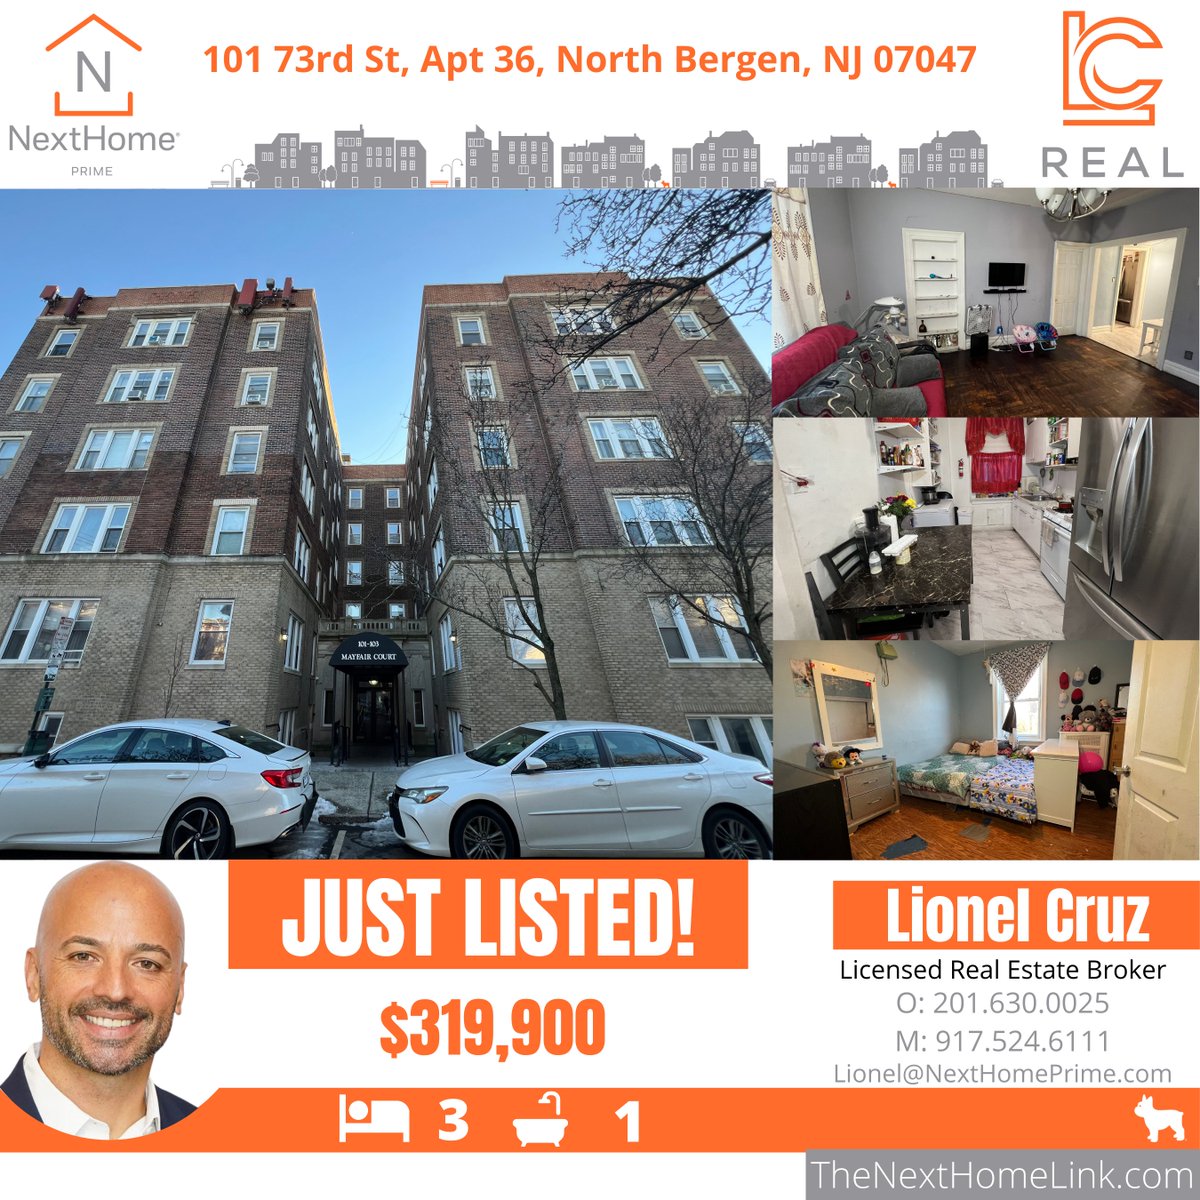 We are now LIVE at 101 73rd St, Apt 36, North Bergen, NJ 07047!

#NextHomePrime #NextHome #RealEstate #condo #ForSale #RealEstateForSale #LionelCruz #LCReal #NewJersey #NJ #Residential #JustListed #home #NewListing #apartment #njrealestate #condominium #CondoForSale #NorthBergen